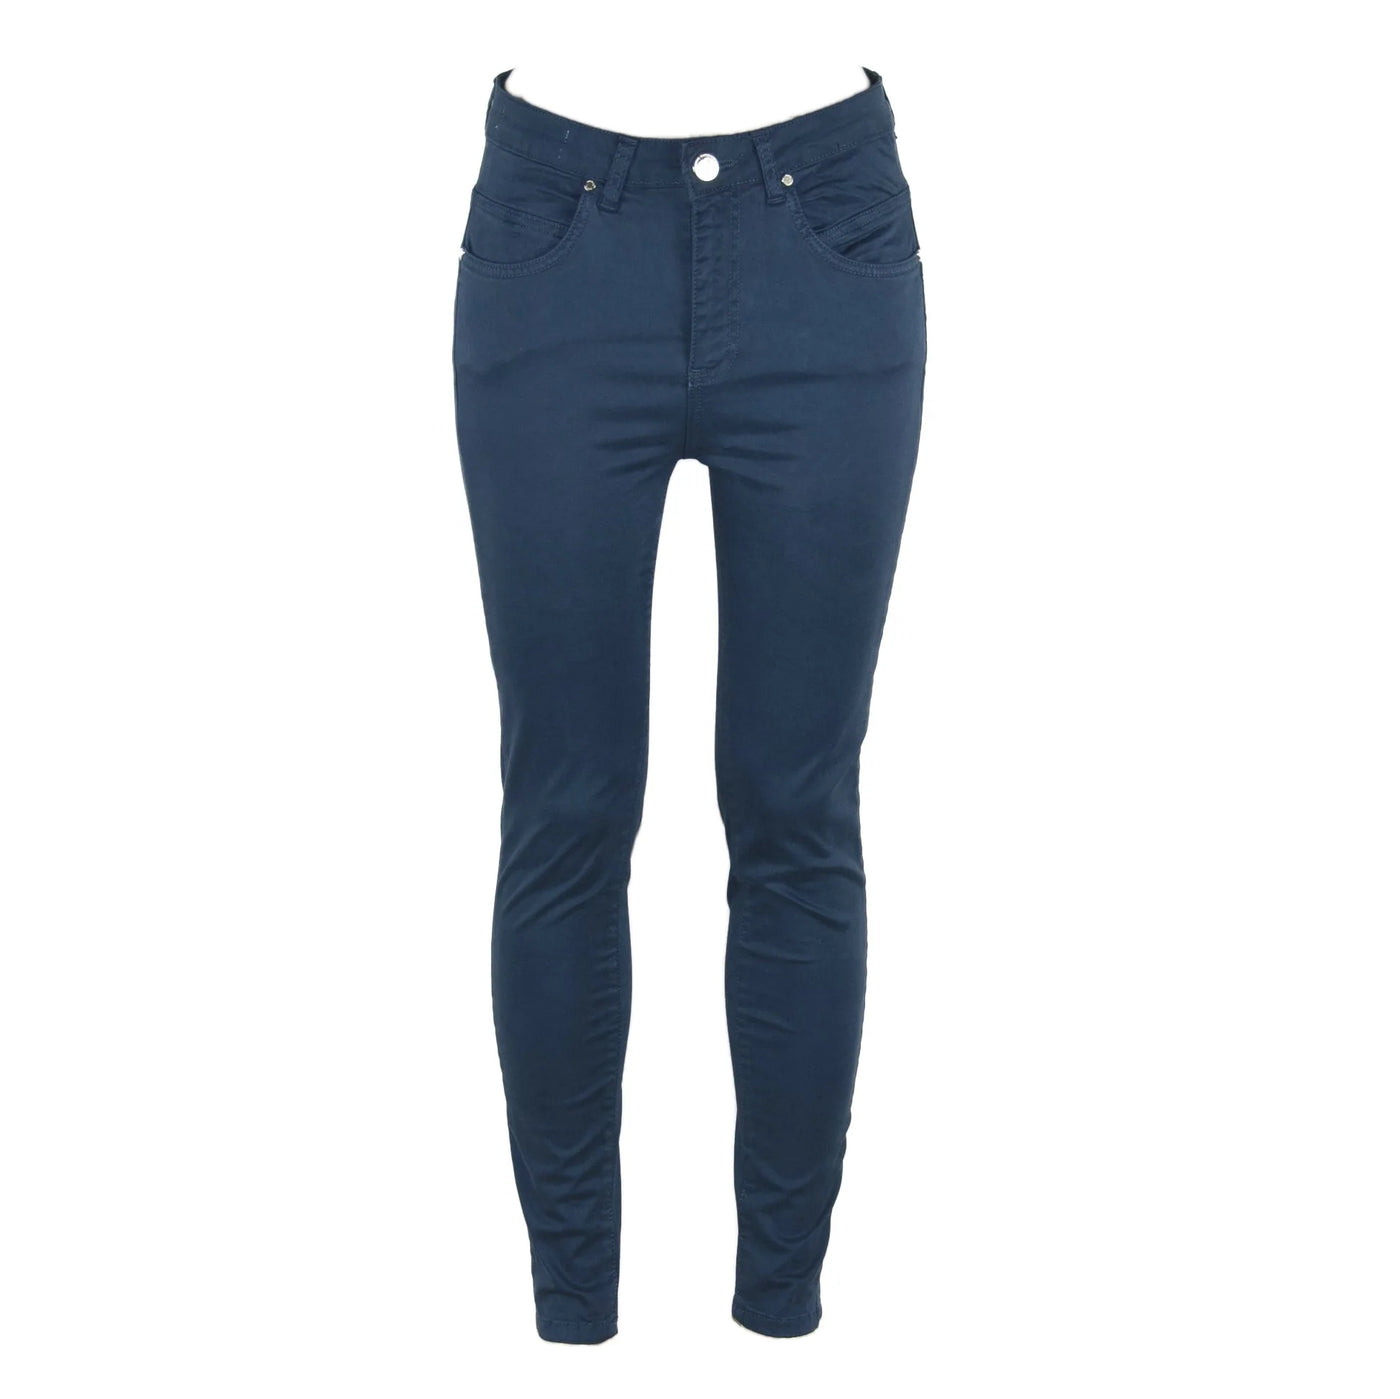 Maison Espin Blue Cotton Jeans & Pant Blue, feed-agegroup-adult, feed-color-Blue, feed-gender-female, Jeans & Pants - Women - Clothing, Maison Espin, W25 | IT39, W26 | IT40, W27 | IT41, W29 | IT43 at SEYMAYKA